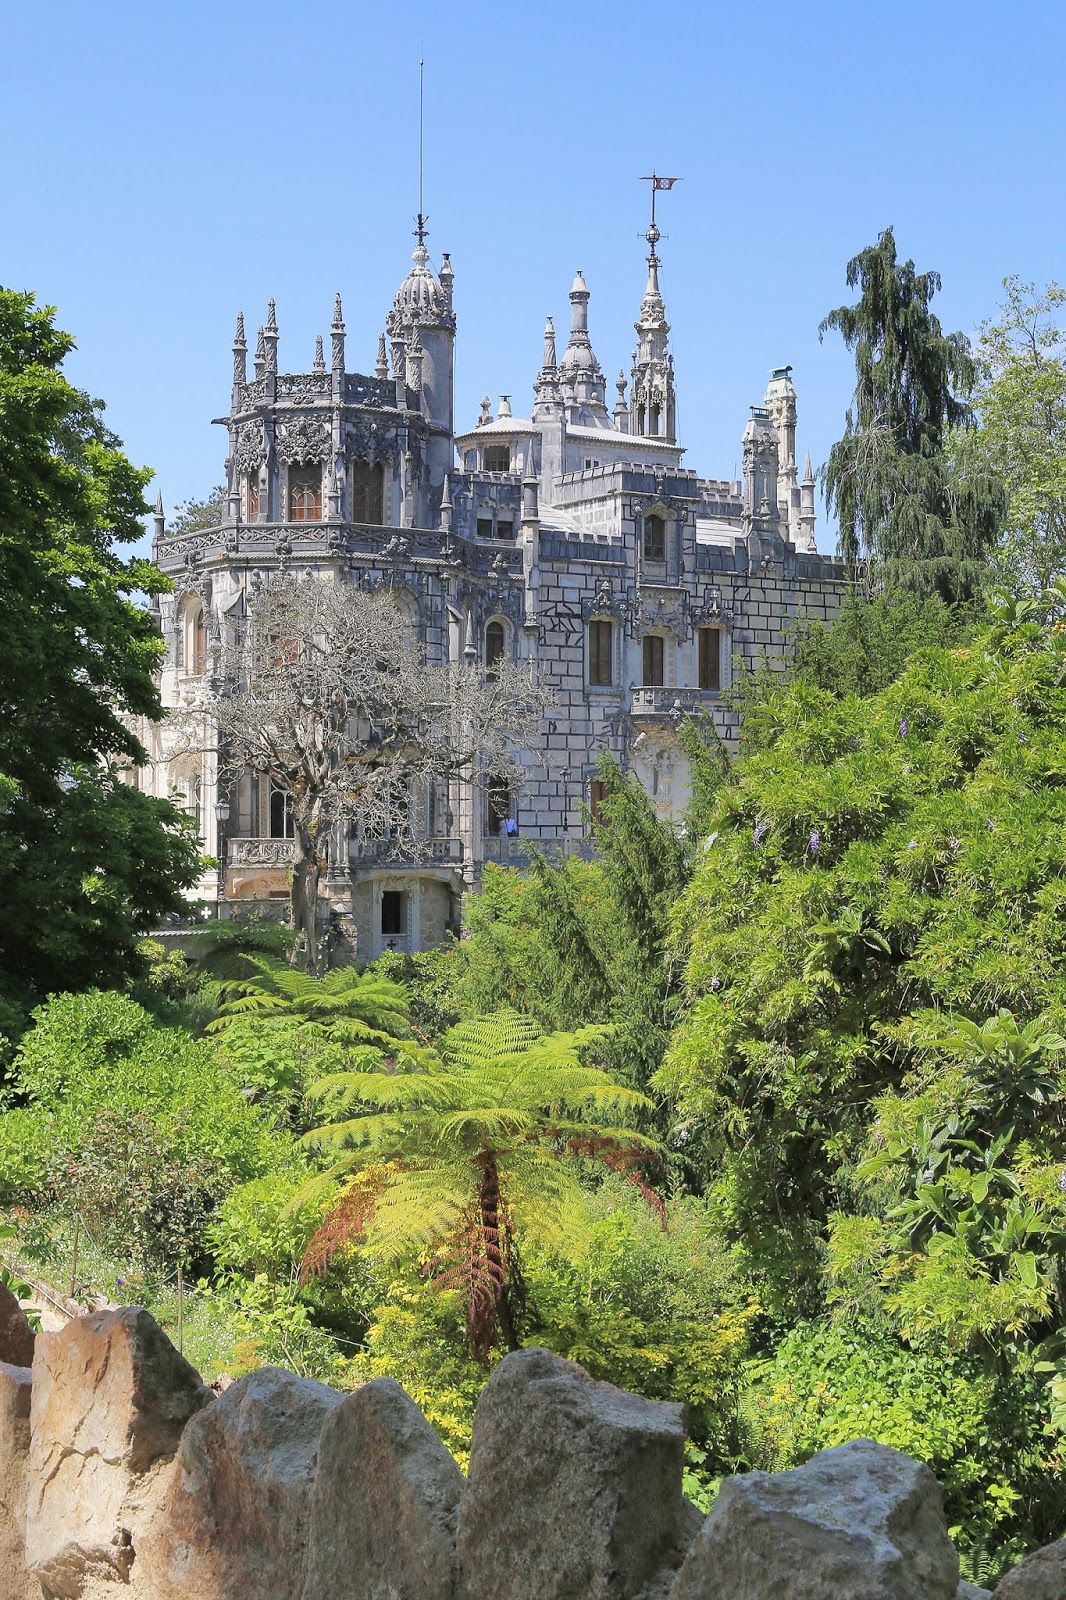 When in Lisbon you must make a day trip to see the famous castles of Sintra. Here are the best palaces & castles to visit in Sintra, Portugal.